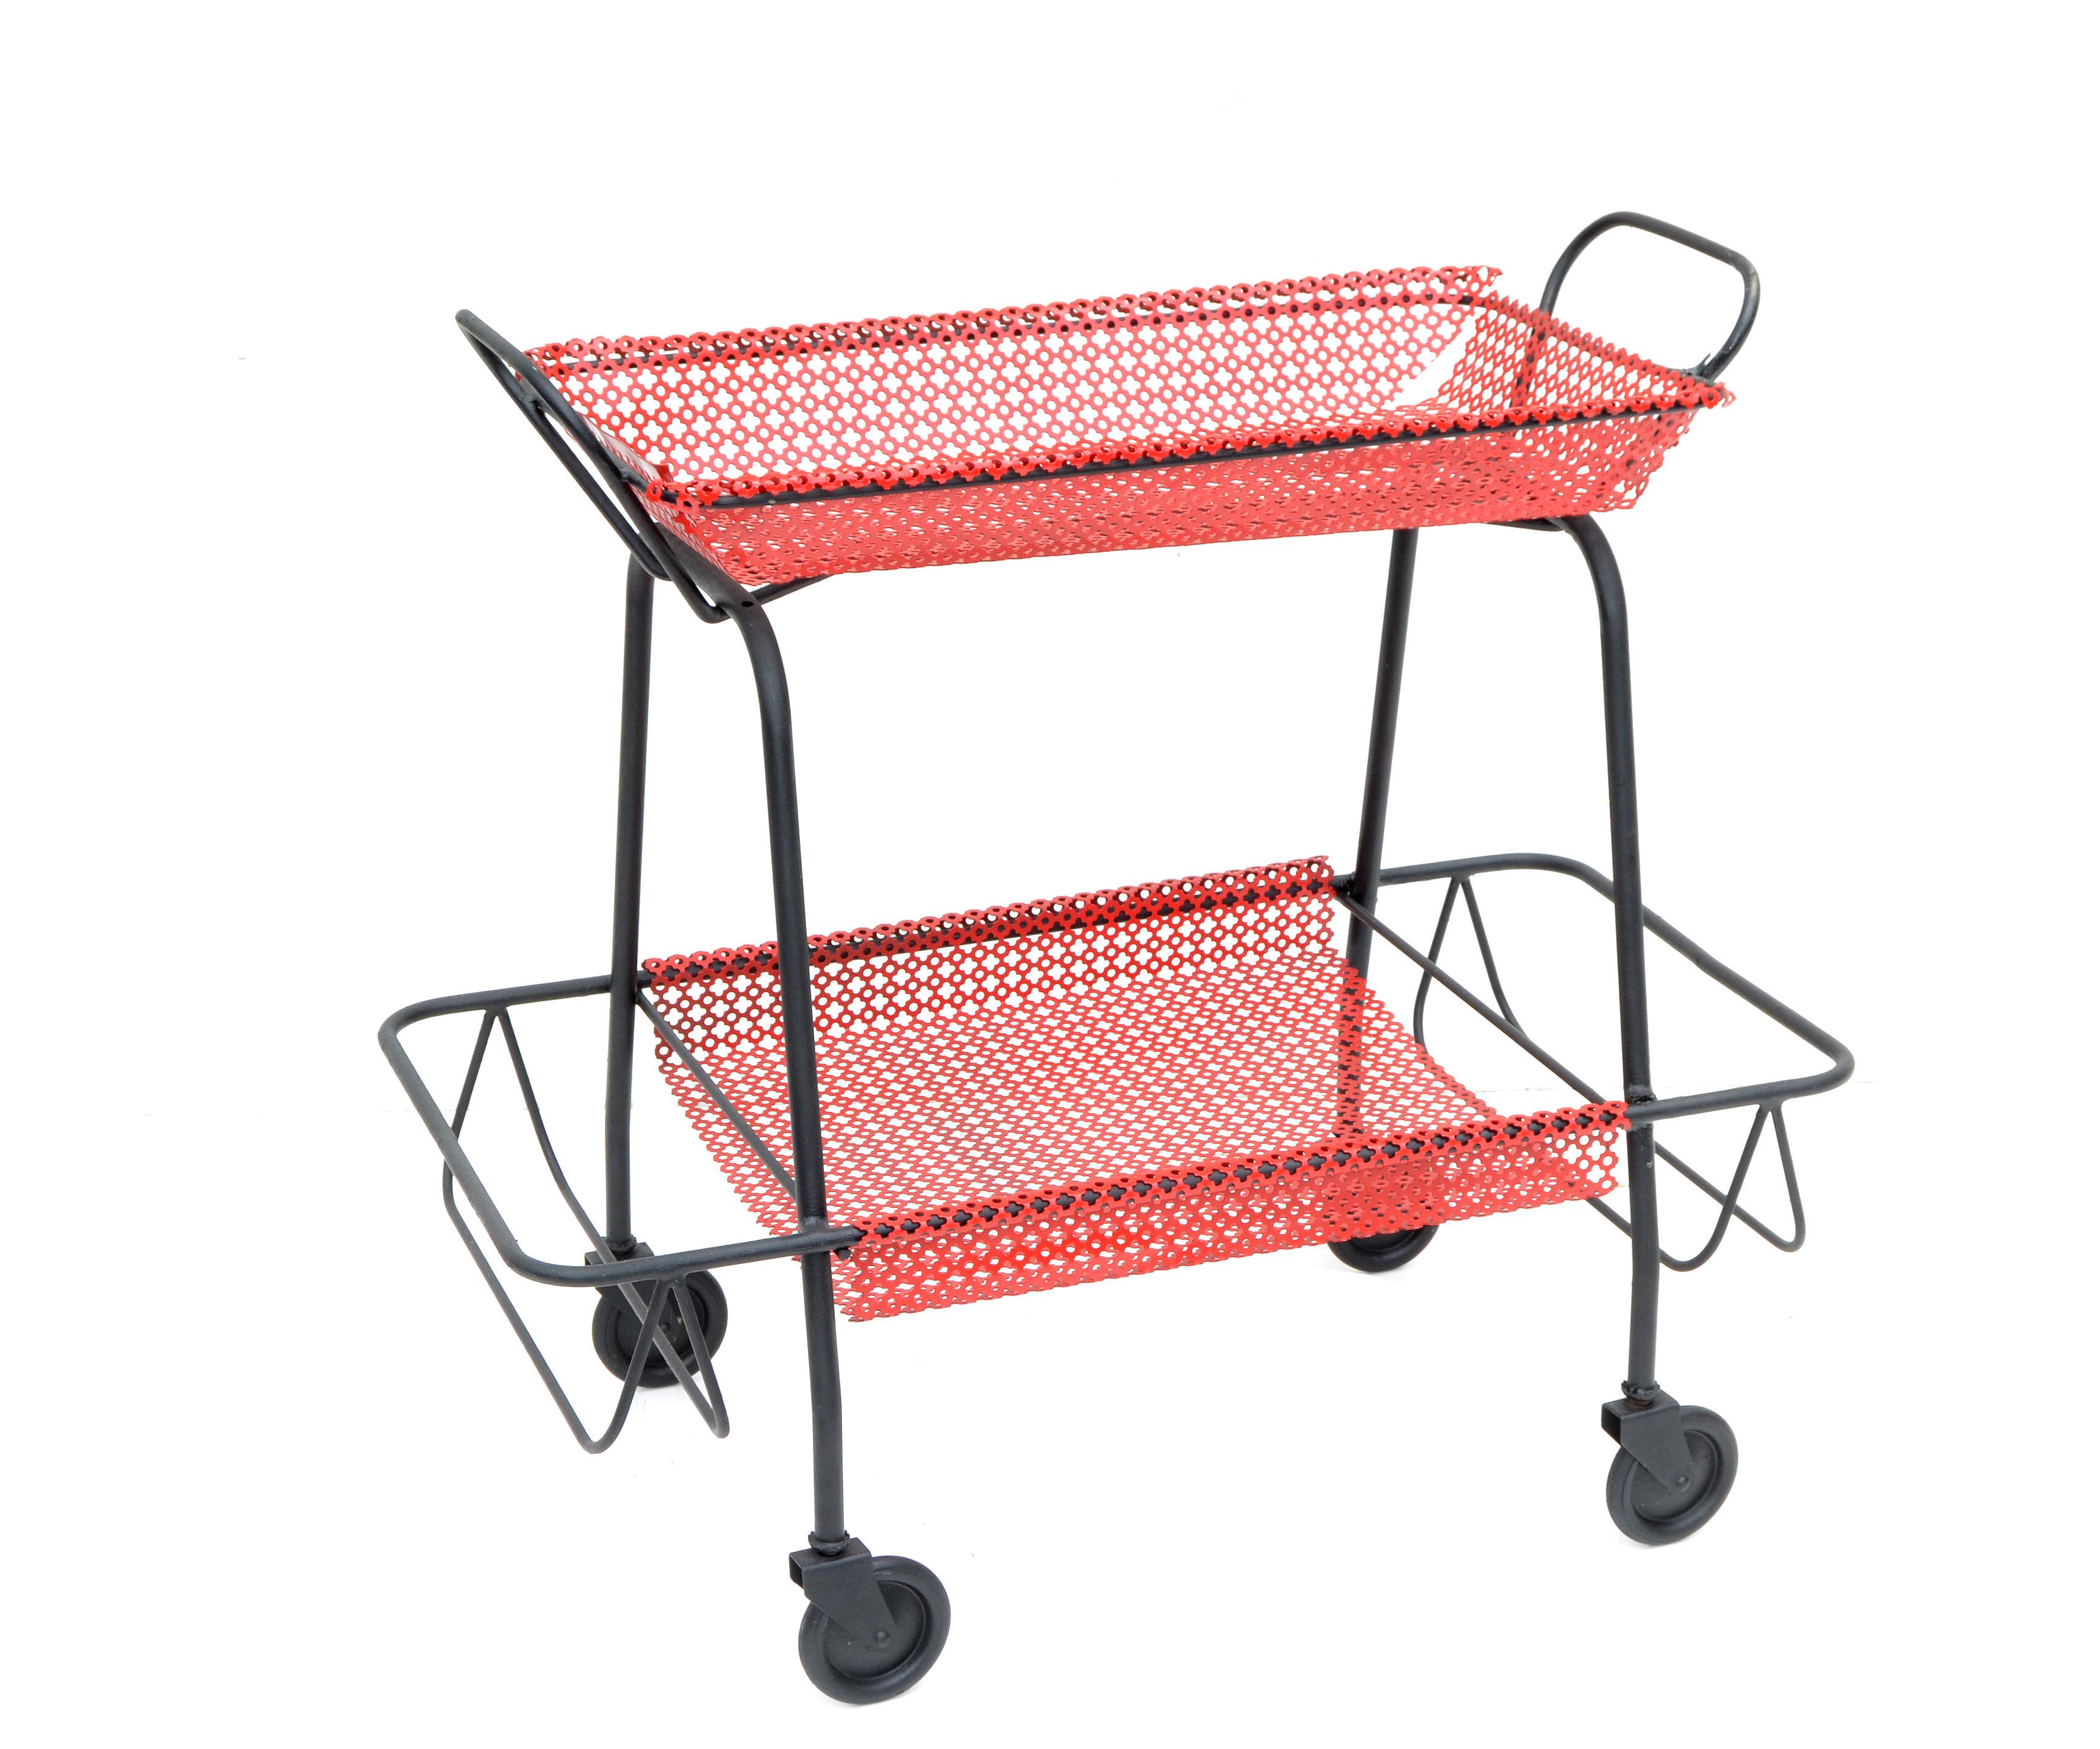 French Mathieu Matégot bar cart in red & black finish, features hand made mesh baskets and comes with the original rubber wheels.
All working smoothly and ready for a new Home.
 